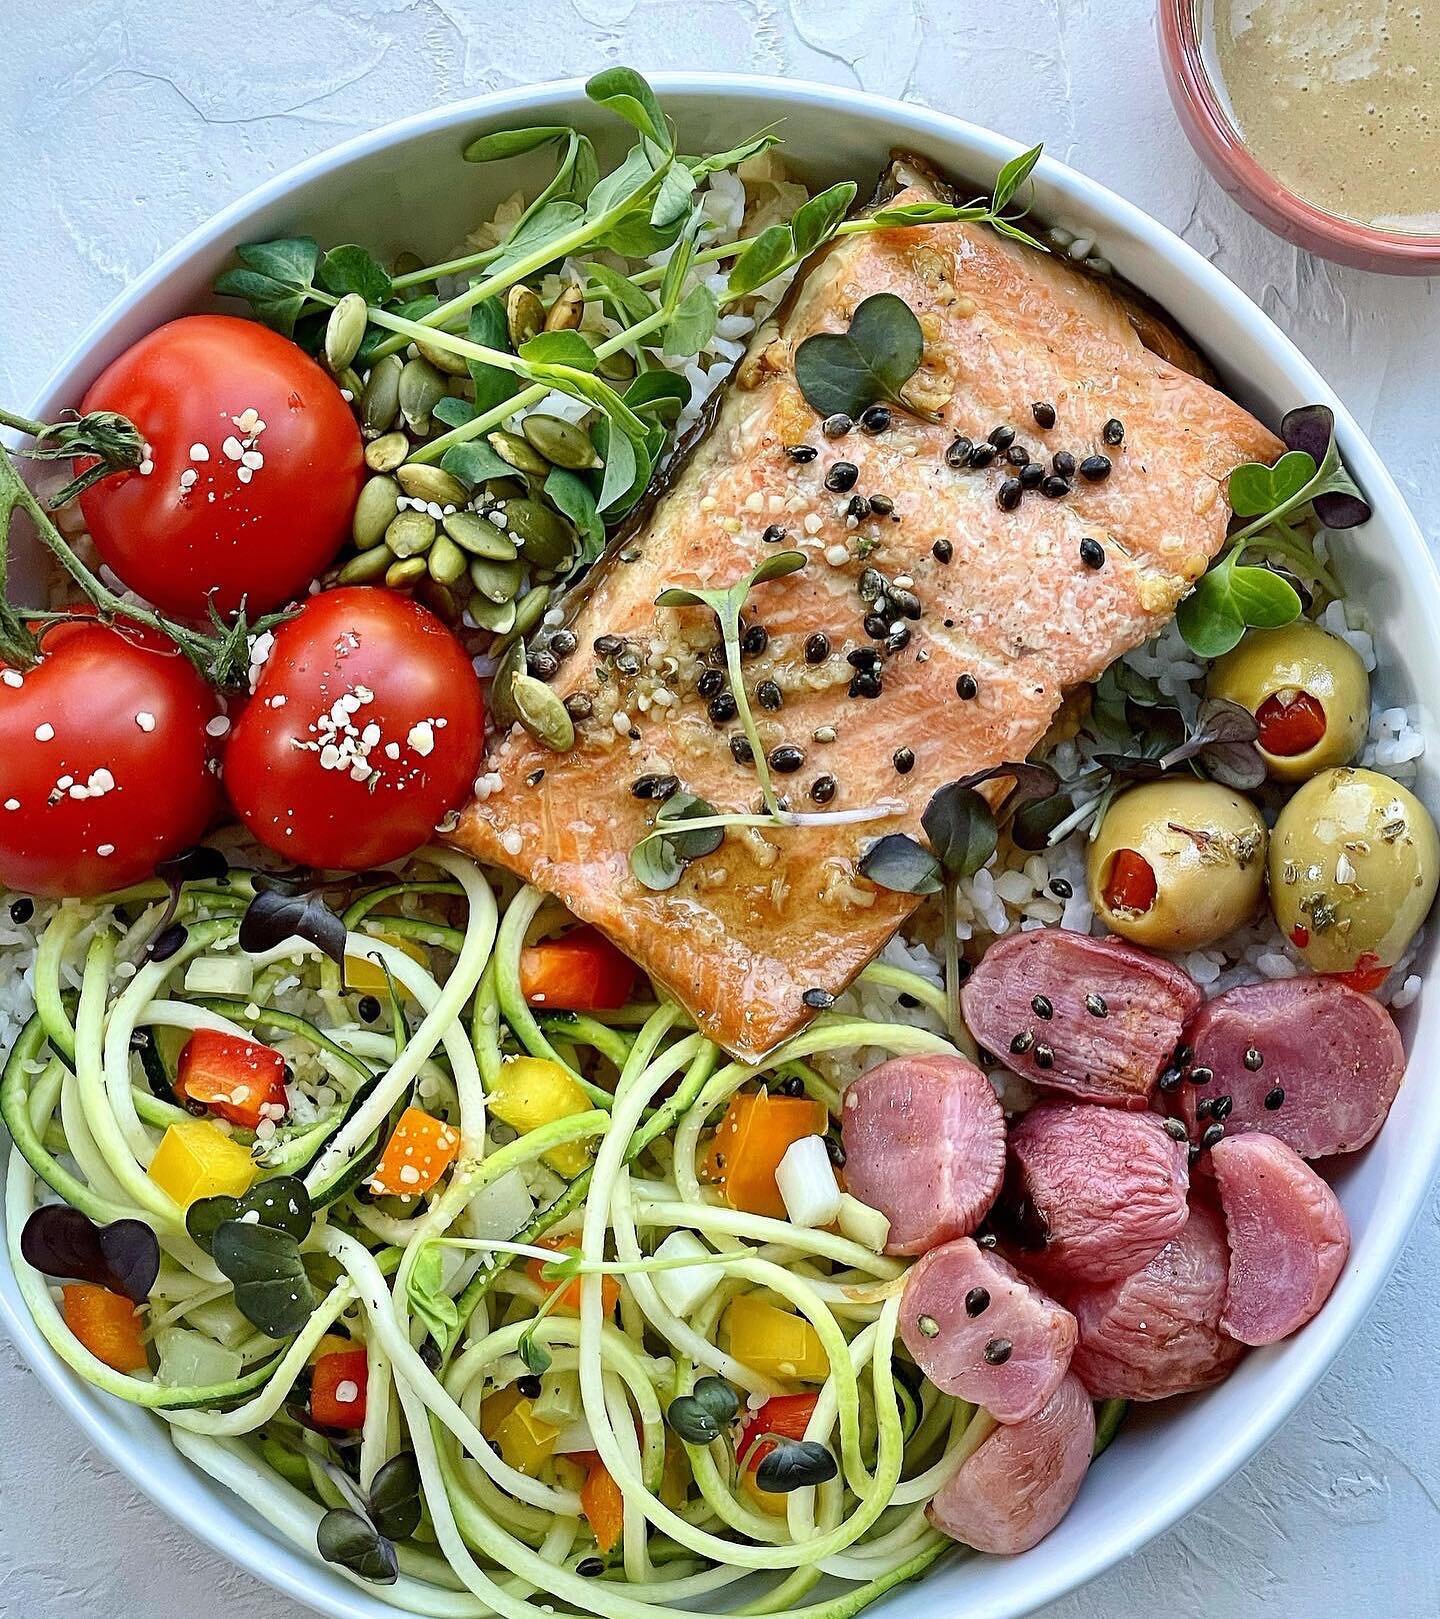 🌈 RAINBOW TROUT RAINBOW BOWL 🌈 for Fish Friday
⠀⠀⠀⠀⠀⠀⠀⠀⠀
(df, grain-free/gf, paleo, keto &amp; RSF)
⠀⠀⠀⠀⠀⠀⠀⠀⠀
⭐️ Don&rsquo;t forget to SAVE this must-try recipe post! ⭐️
⠀⠀⠀⠀⠀⠀⠀⠀⠀
This meal hit the spot and then some.  It had a wonderful mix of fla